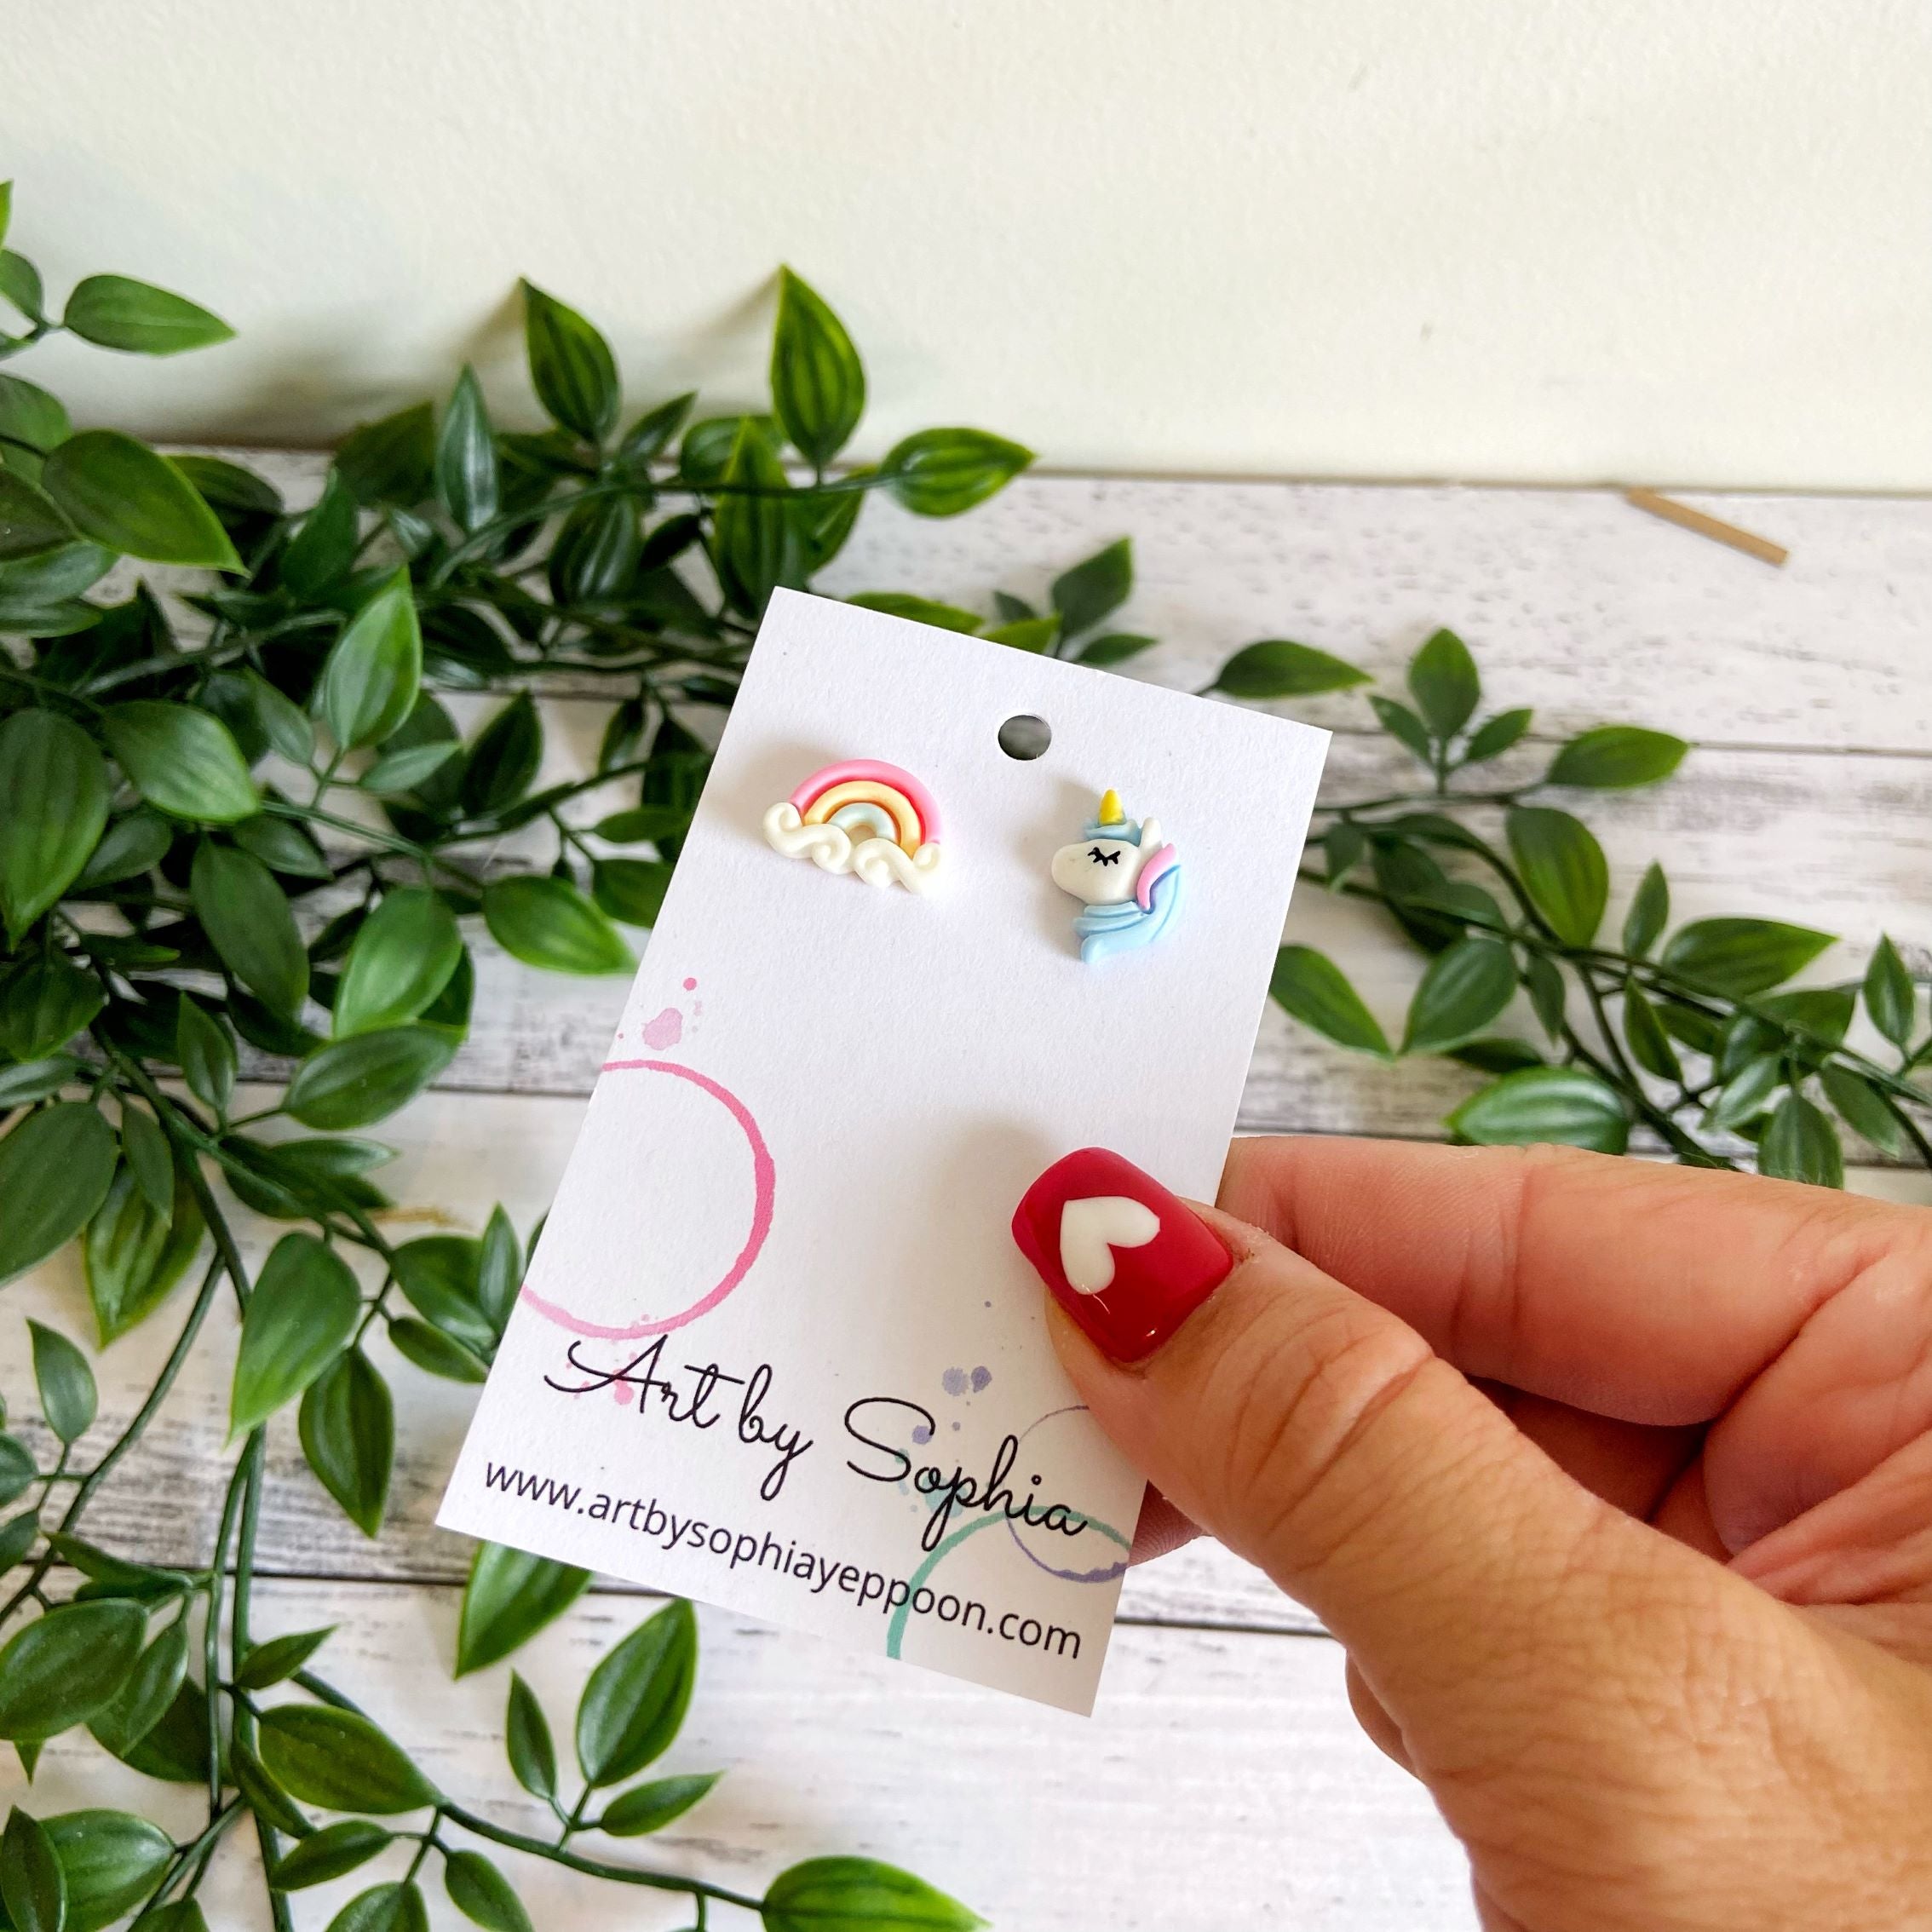 Handmade fun and quirky earrings and accessories Made in Australia  Art  by Sophia Yeppoon